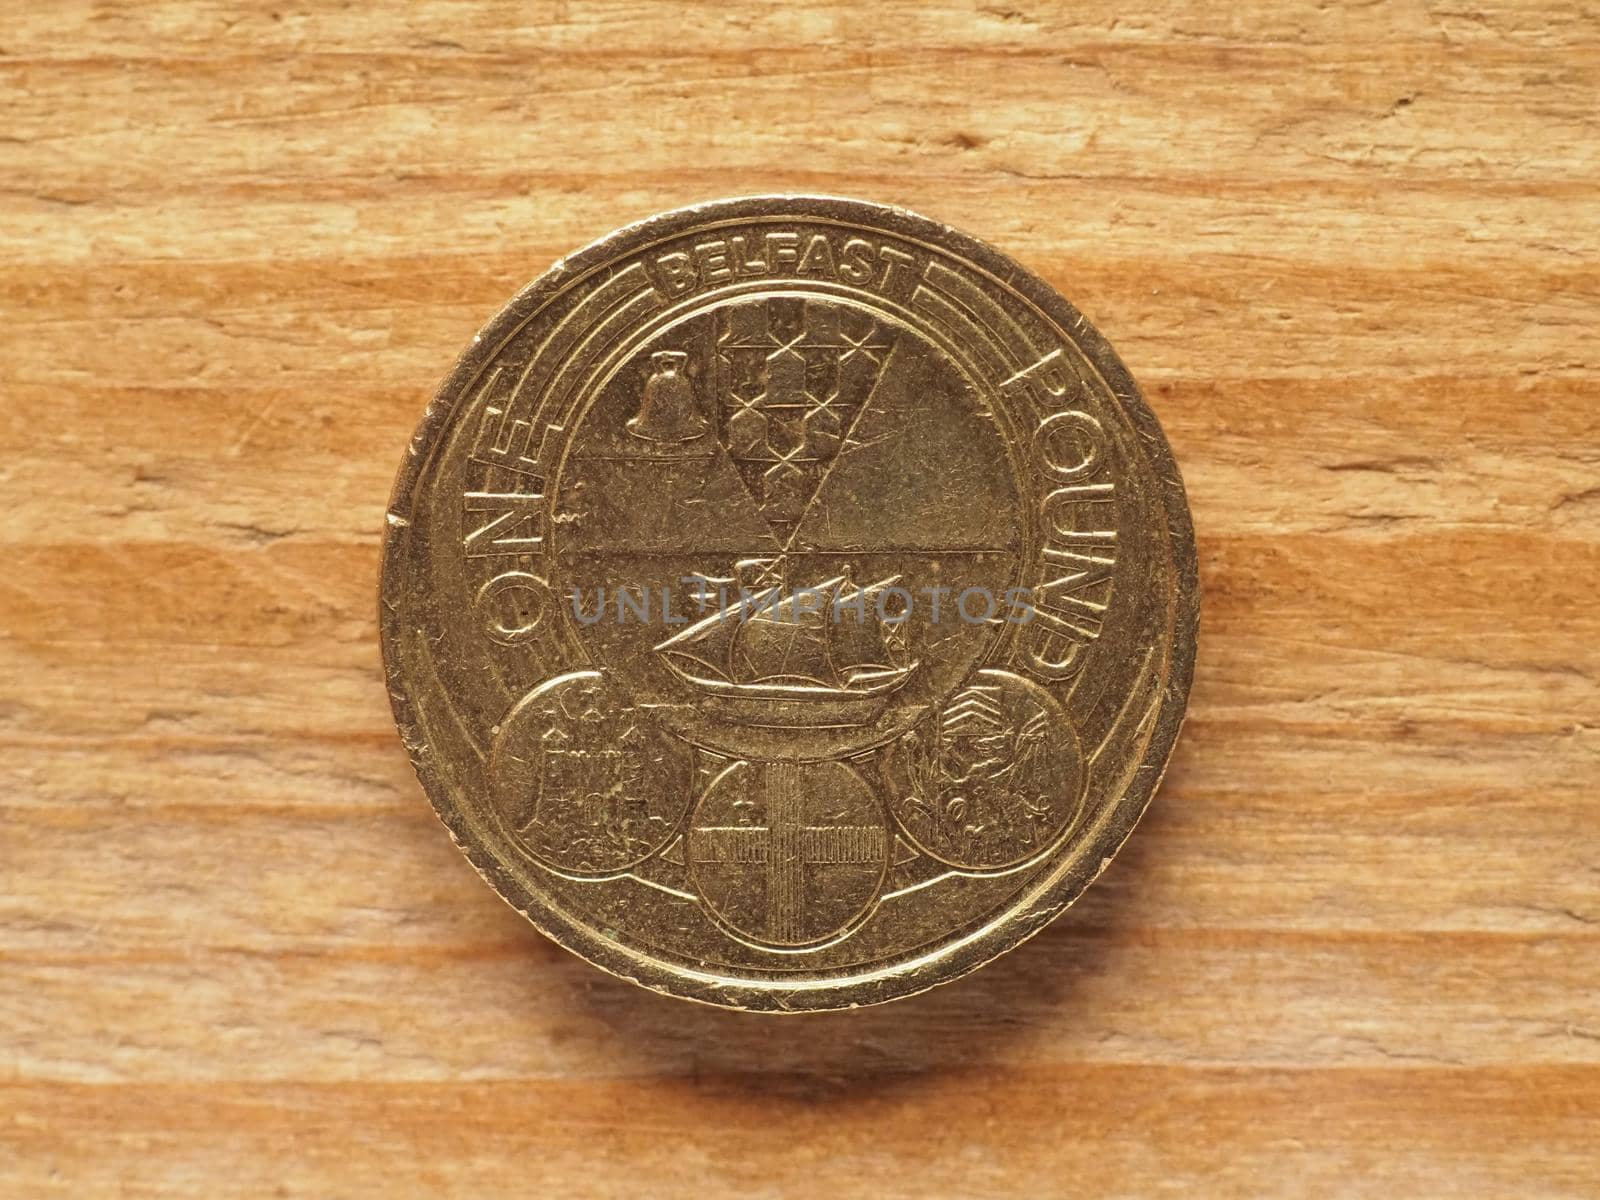 one pound coin reverse side showing badge of Belfast, currency of the United Kingdom